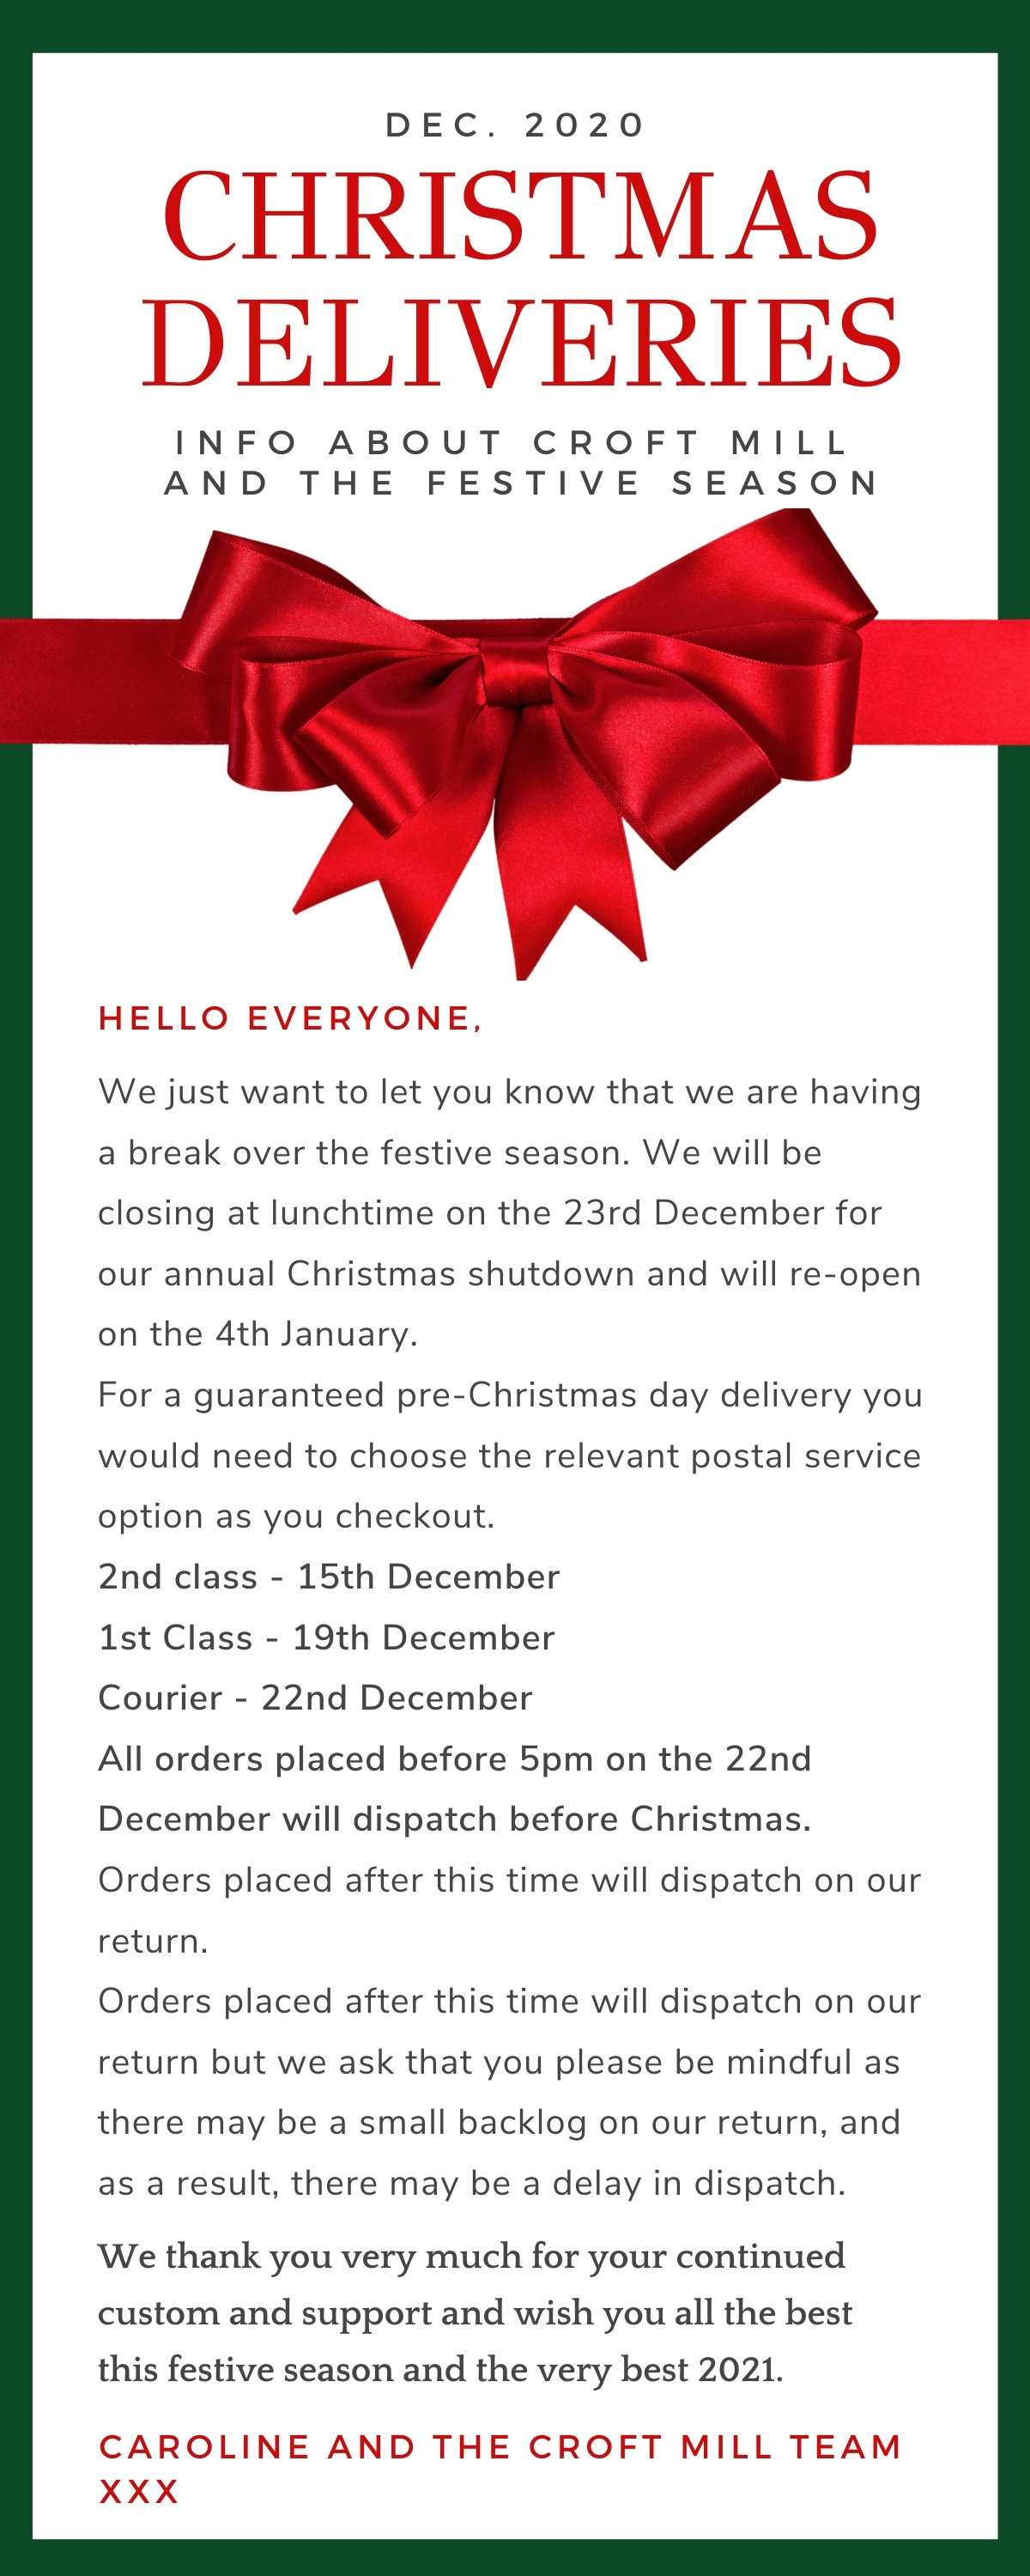 Mailchimp and website info-graphic re Croft Mill Christmas Deliveries 2020